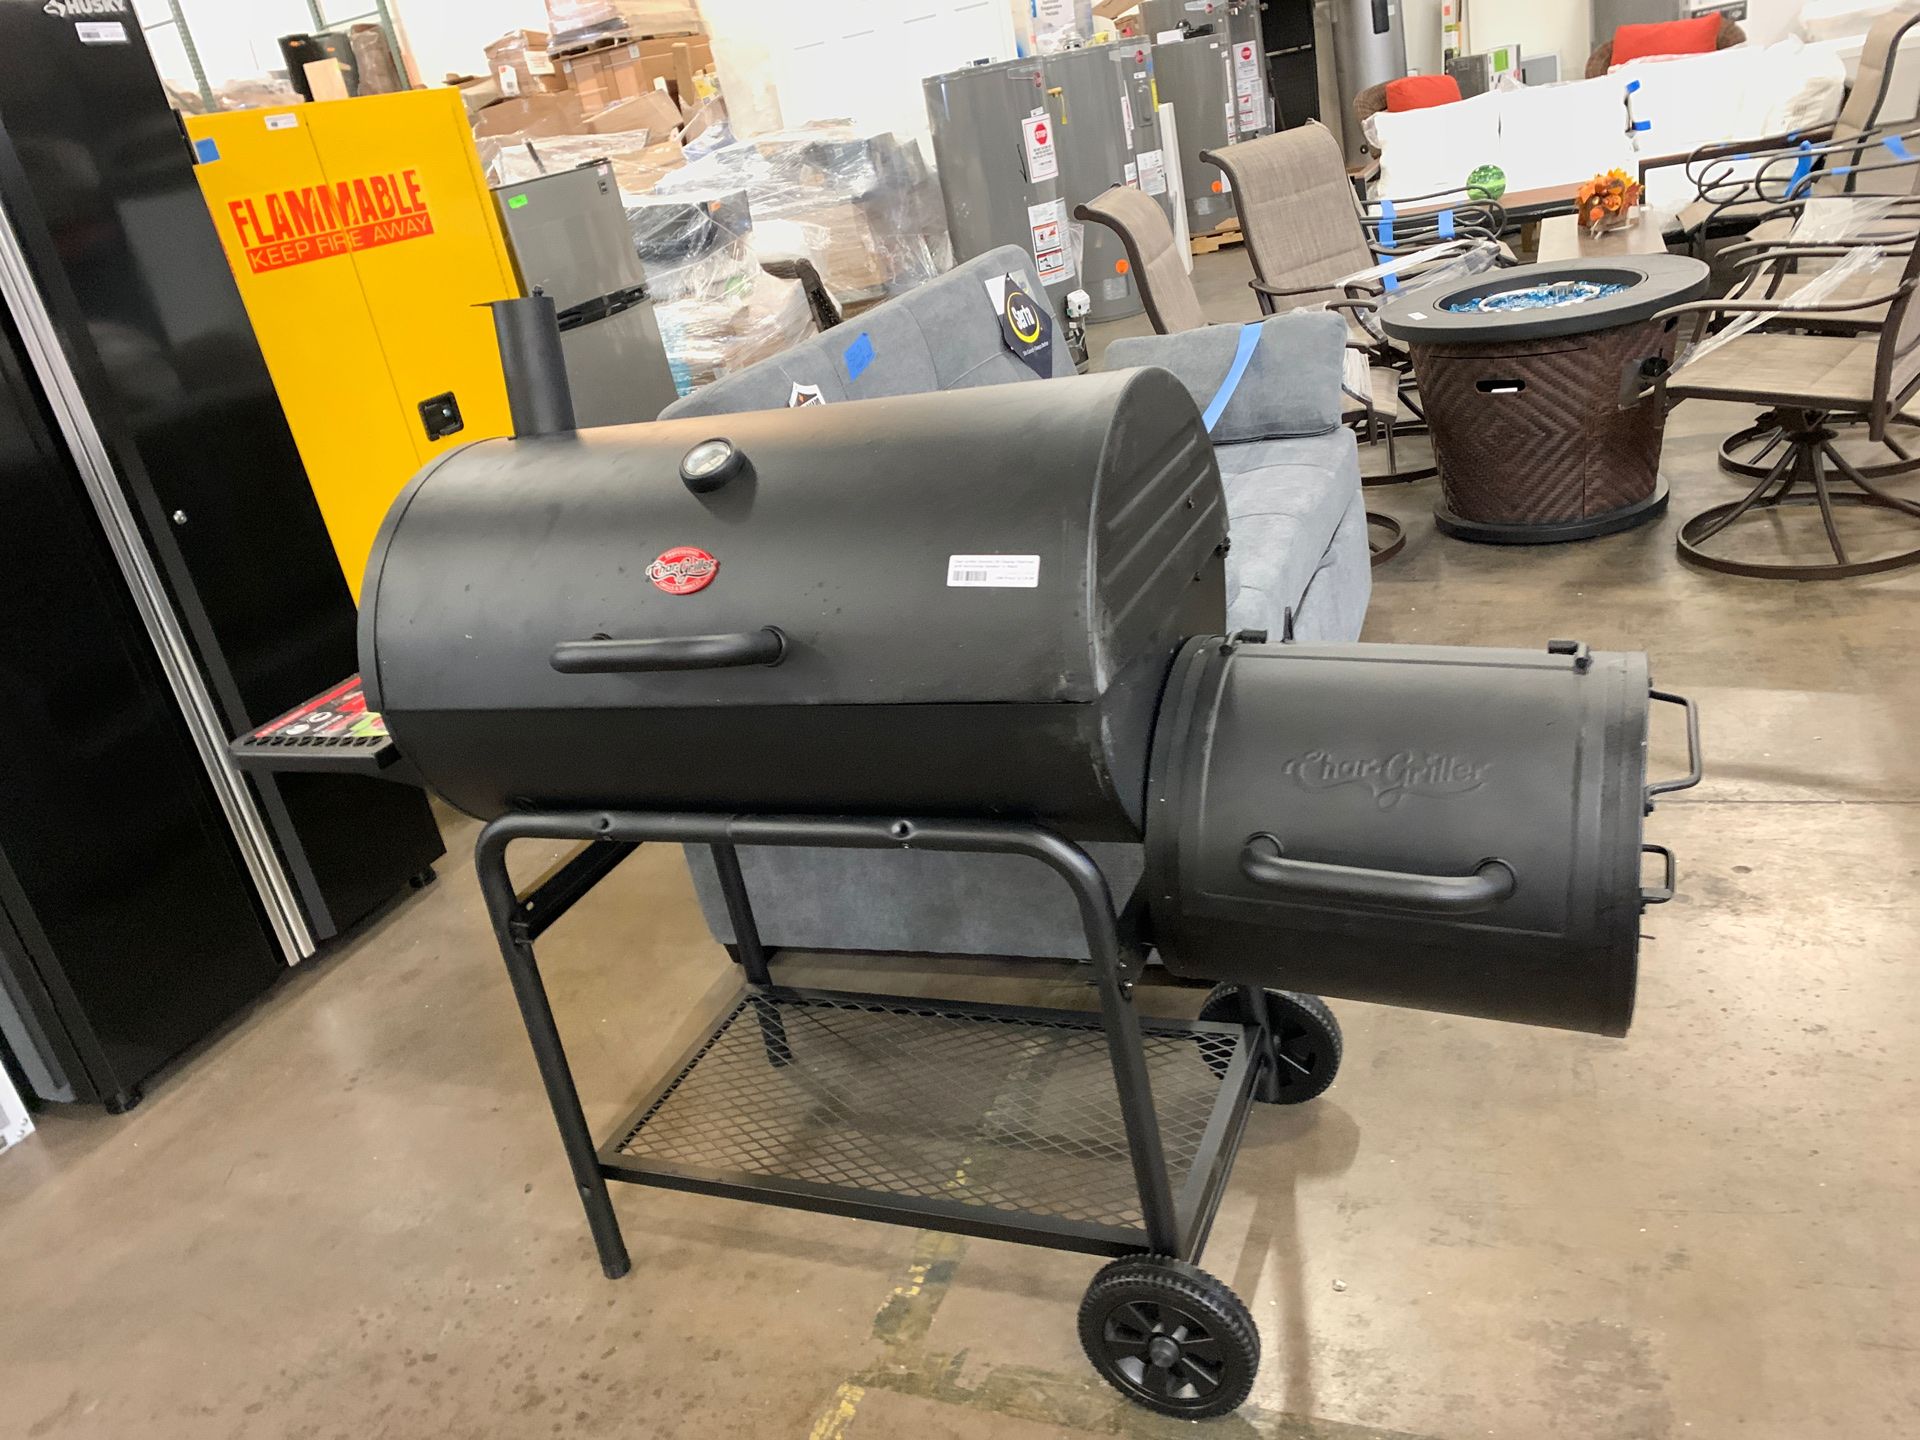 Char griller charcoal grill